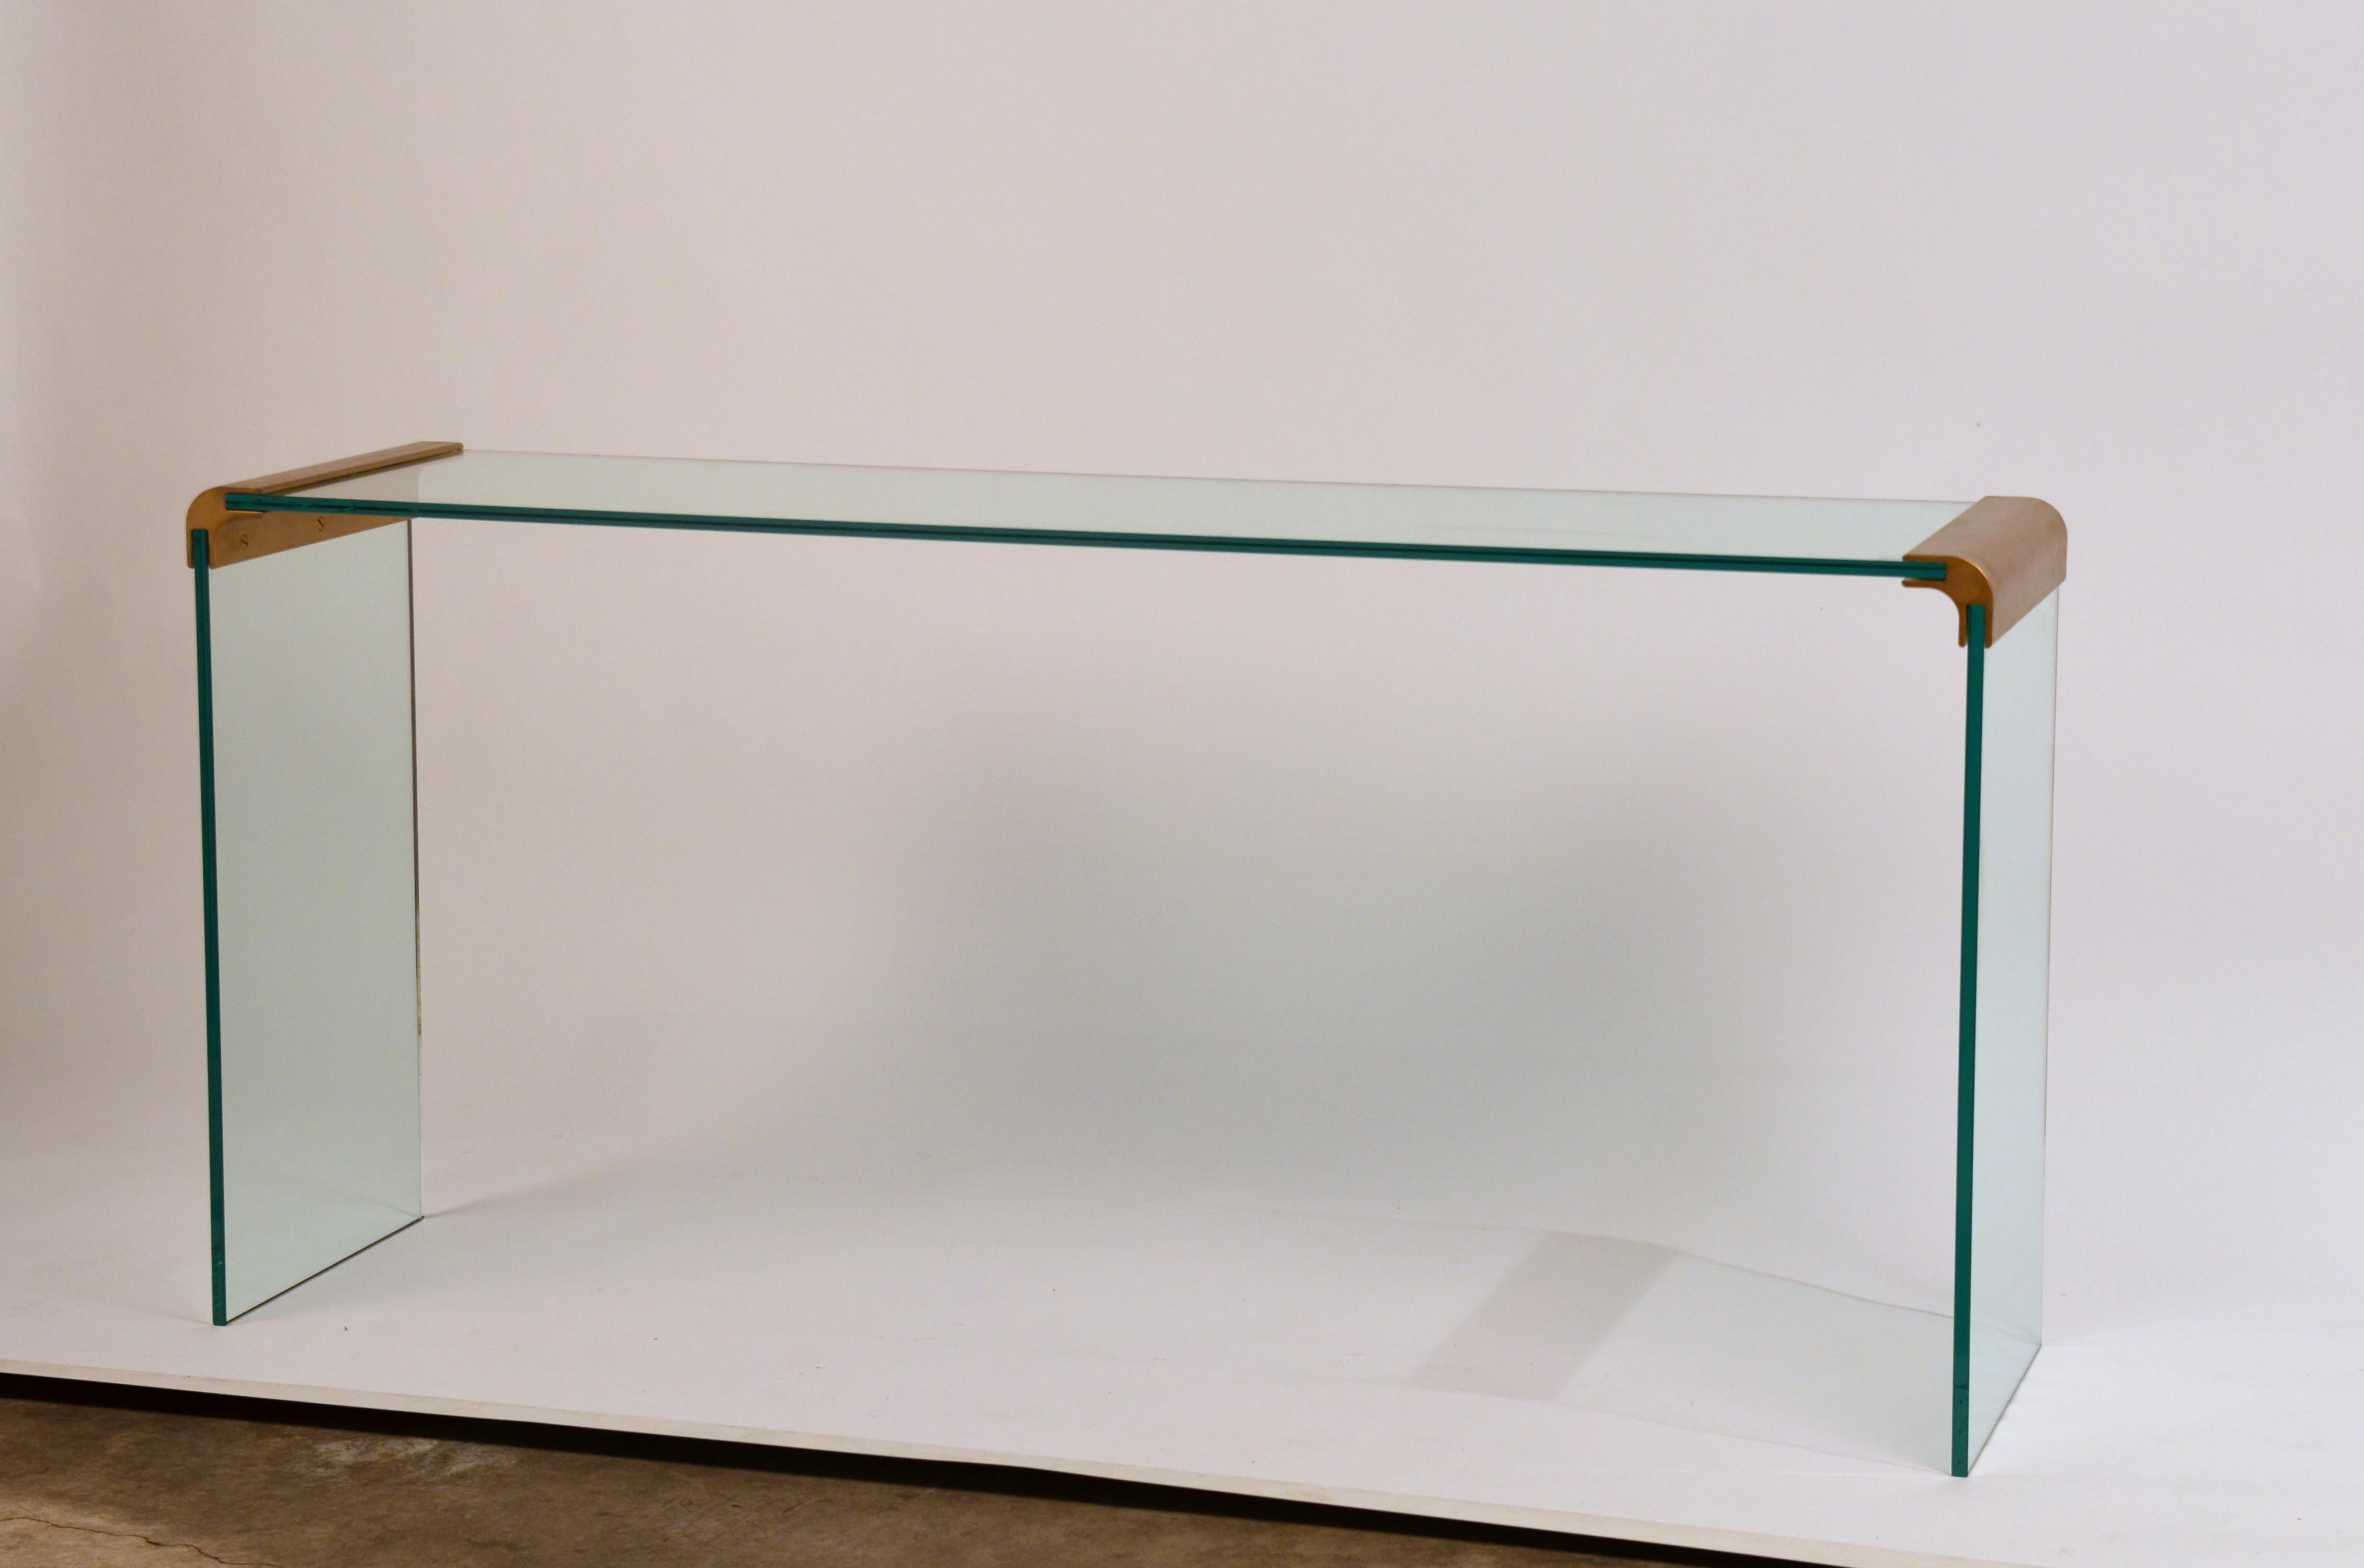 Slender glass and gilt bronze waterfall console by Leon Rosen for Pace collection. Beautiful minimal design.

Great as a console or a sofa table.

The Pace collection was a high-end contemporary furniture company in business from 1960-2001. The